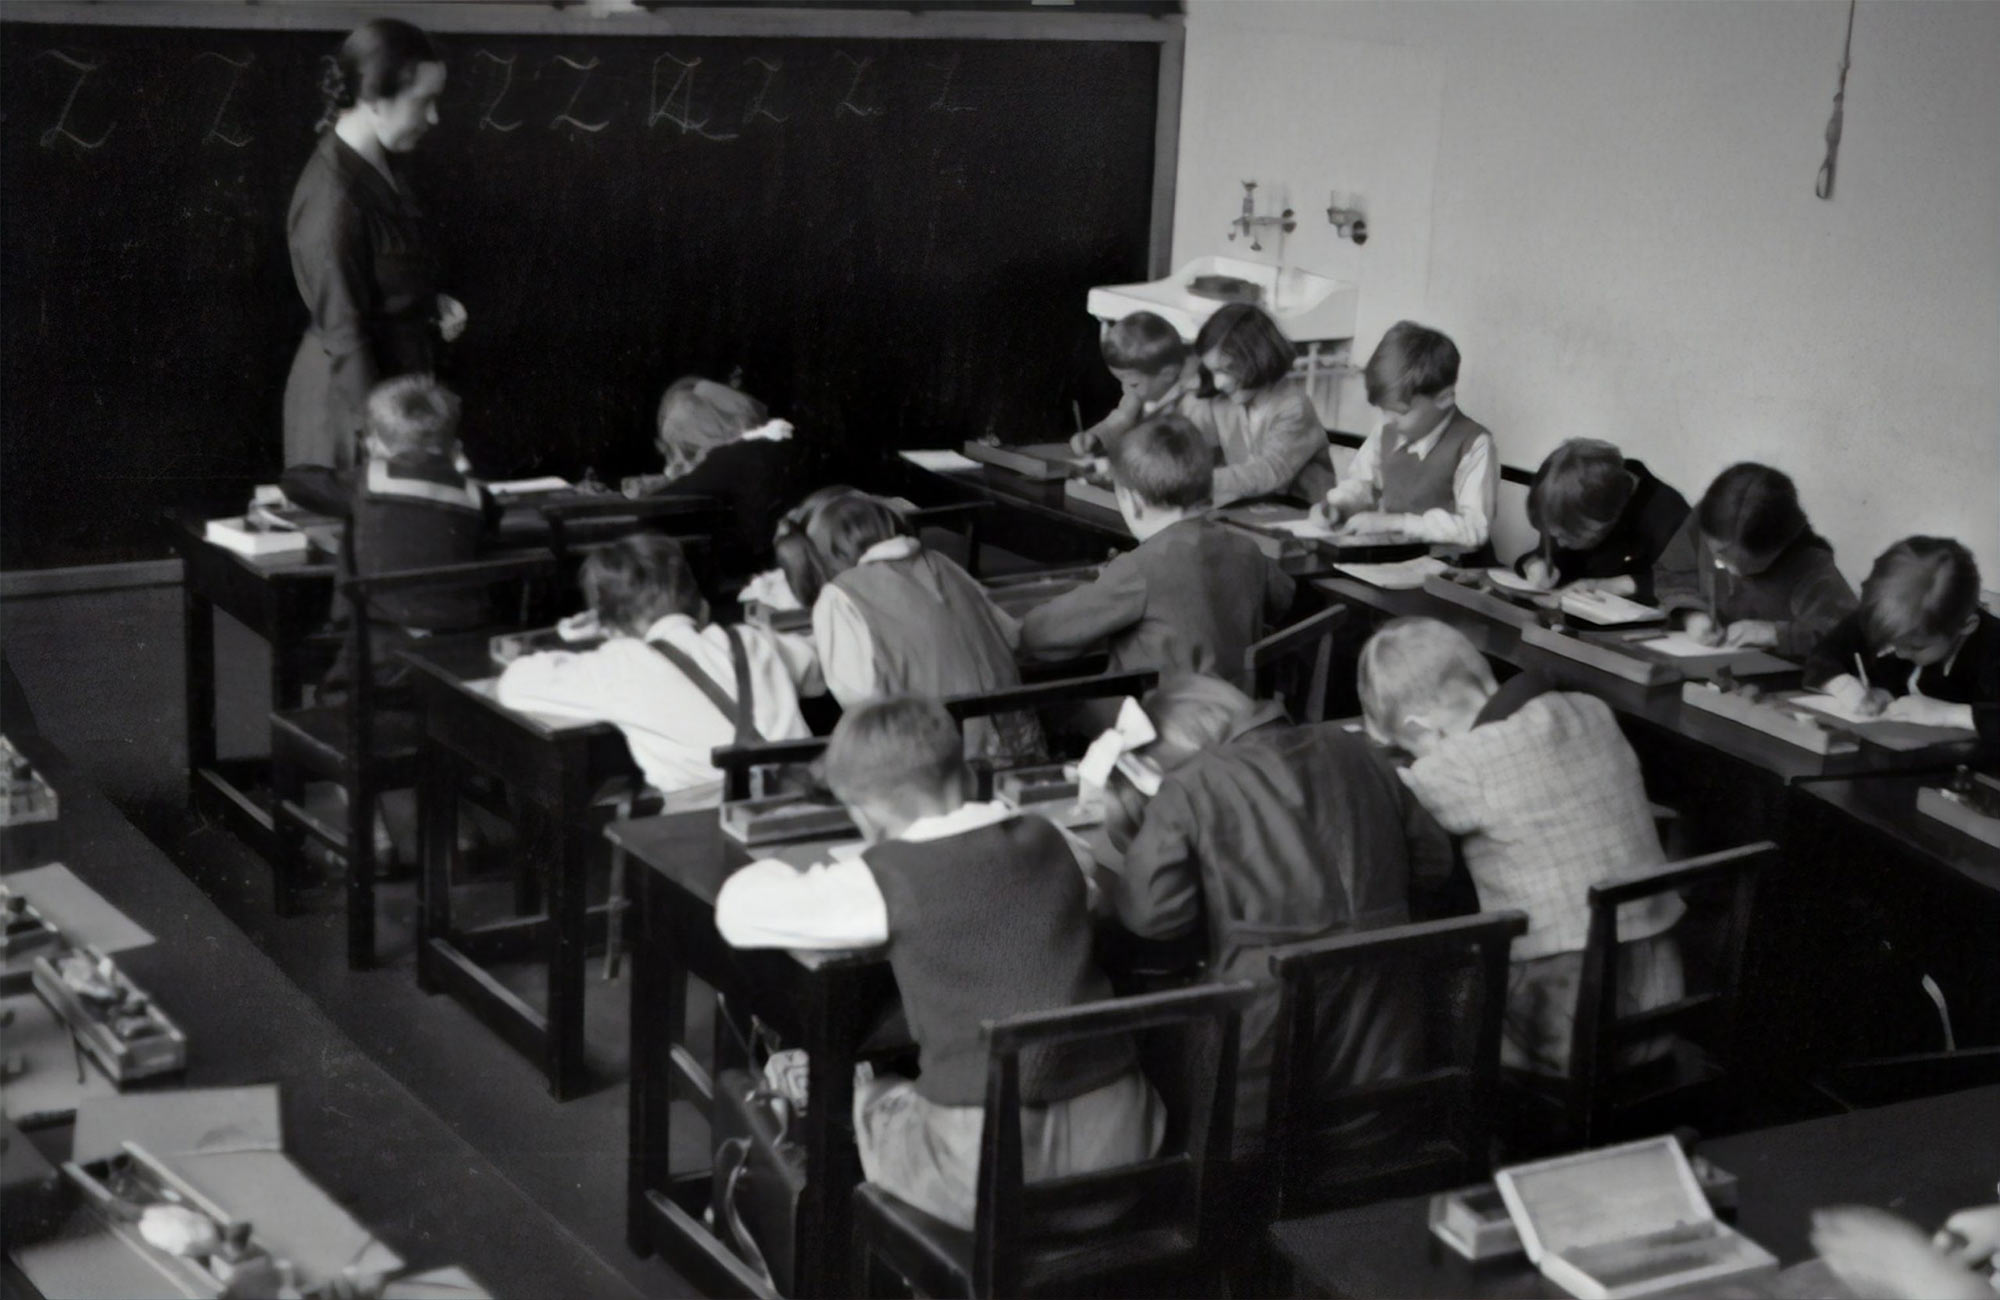 Black and white photo of early 20th century classroom